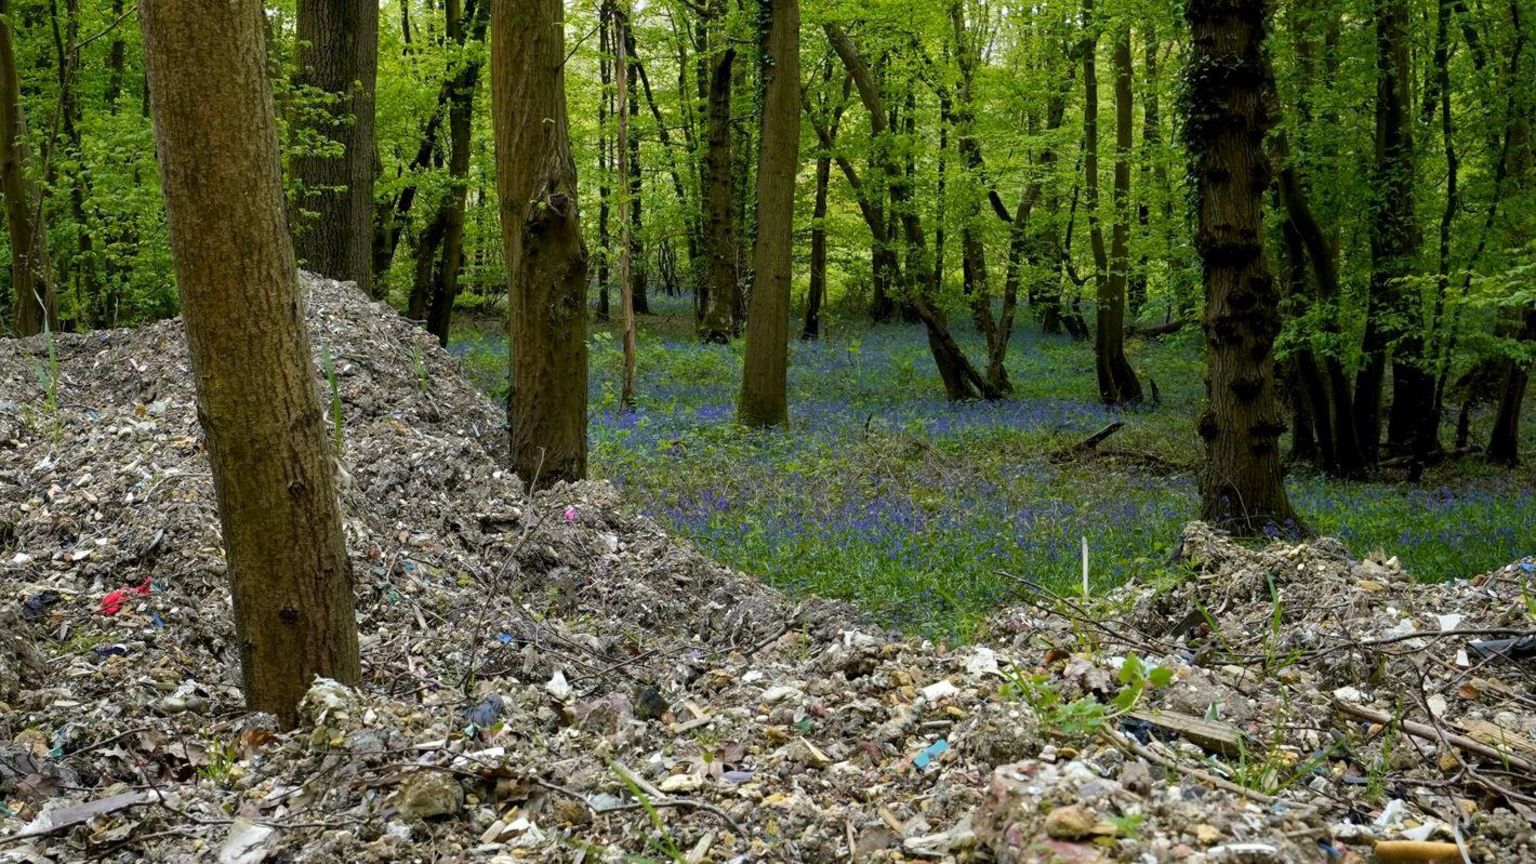 Trees buried in a pile of rubbish in the foreground with bluebells visible on the woodland floor in the background